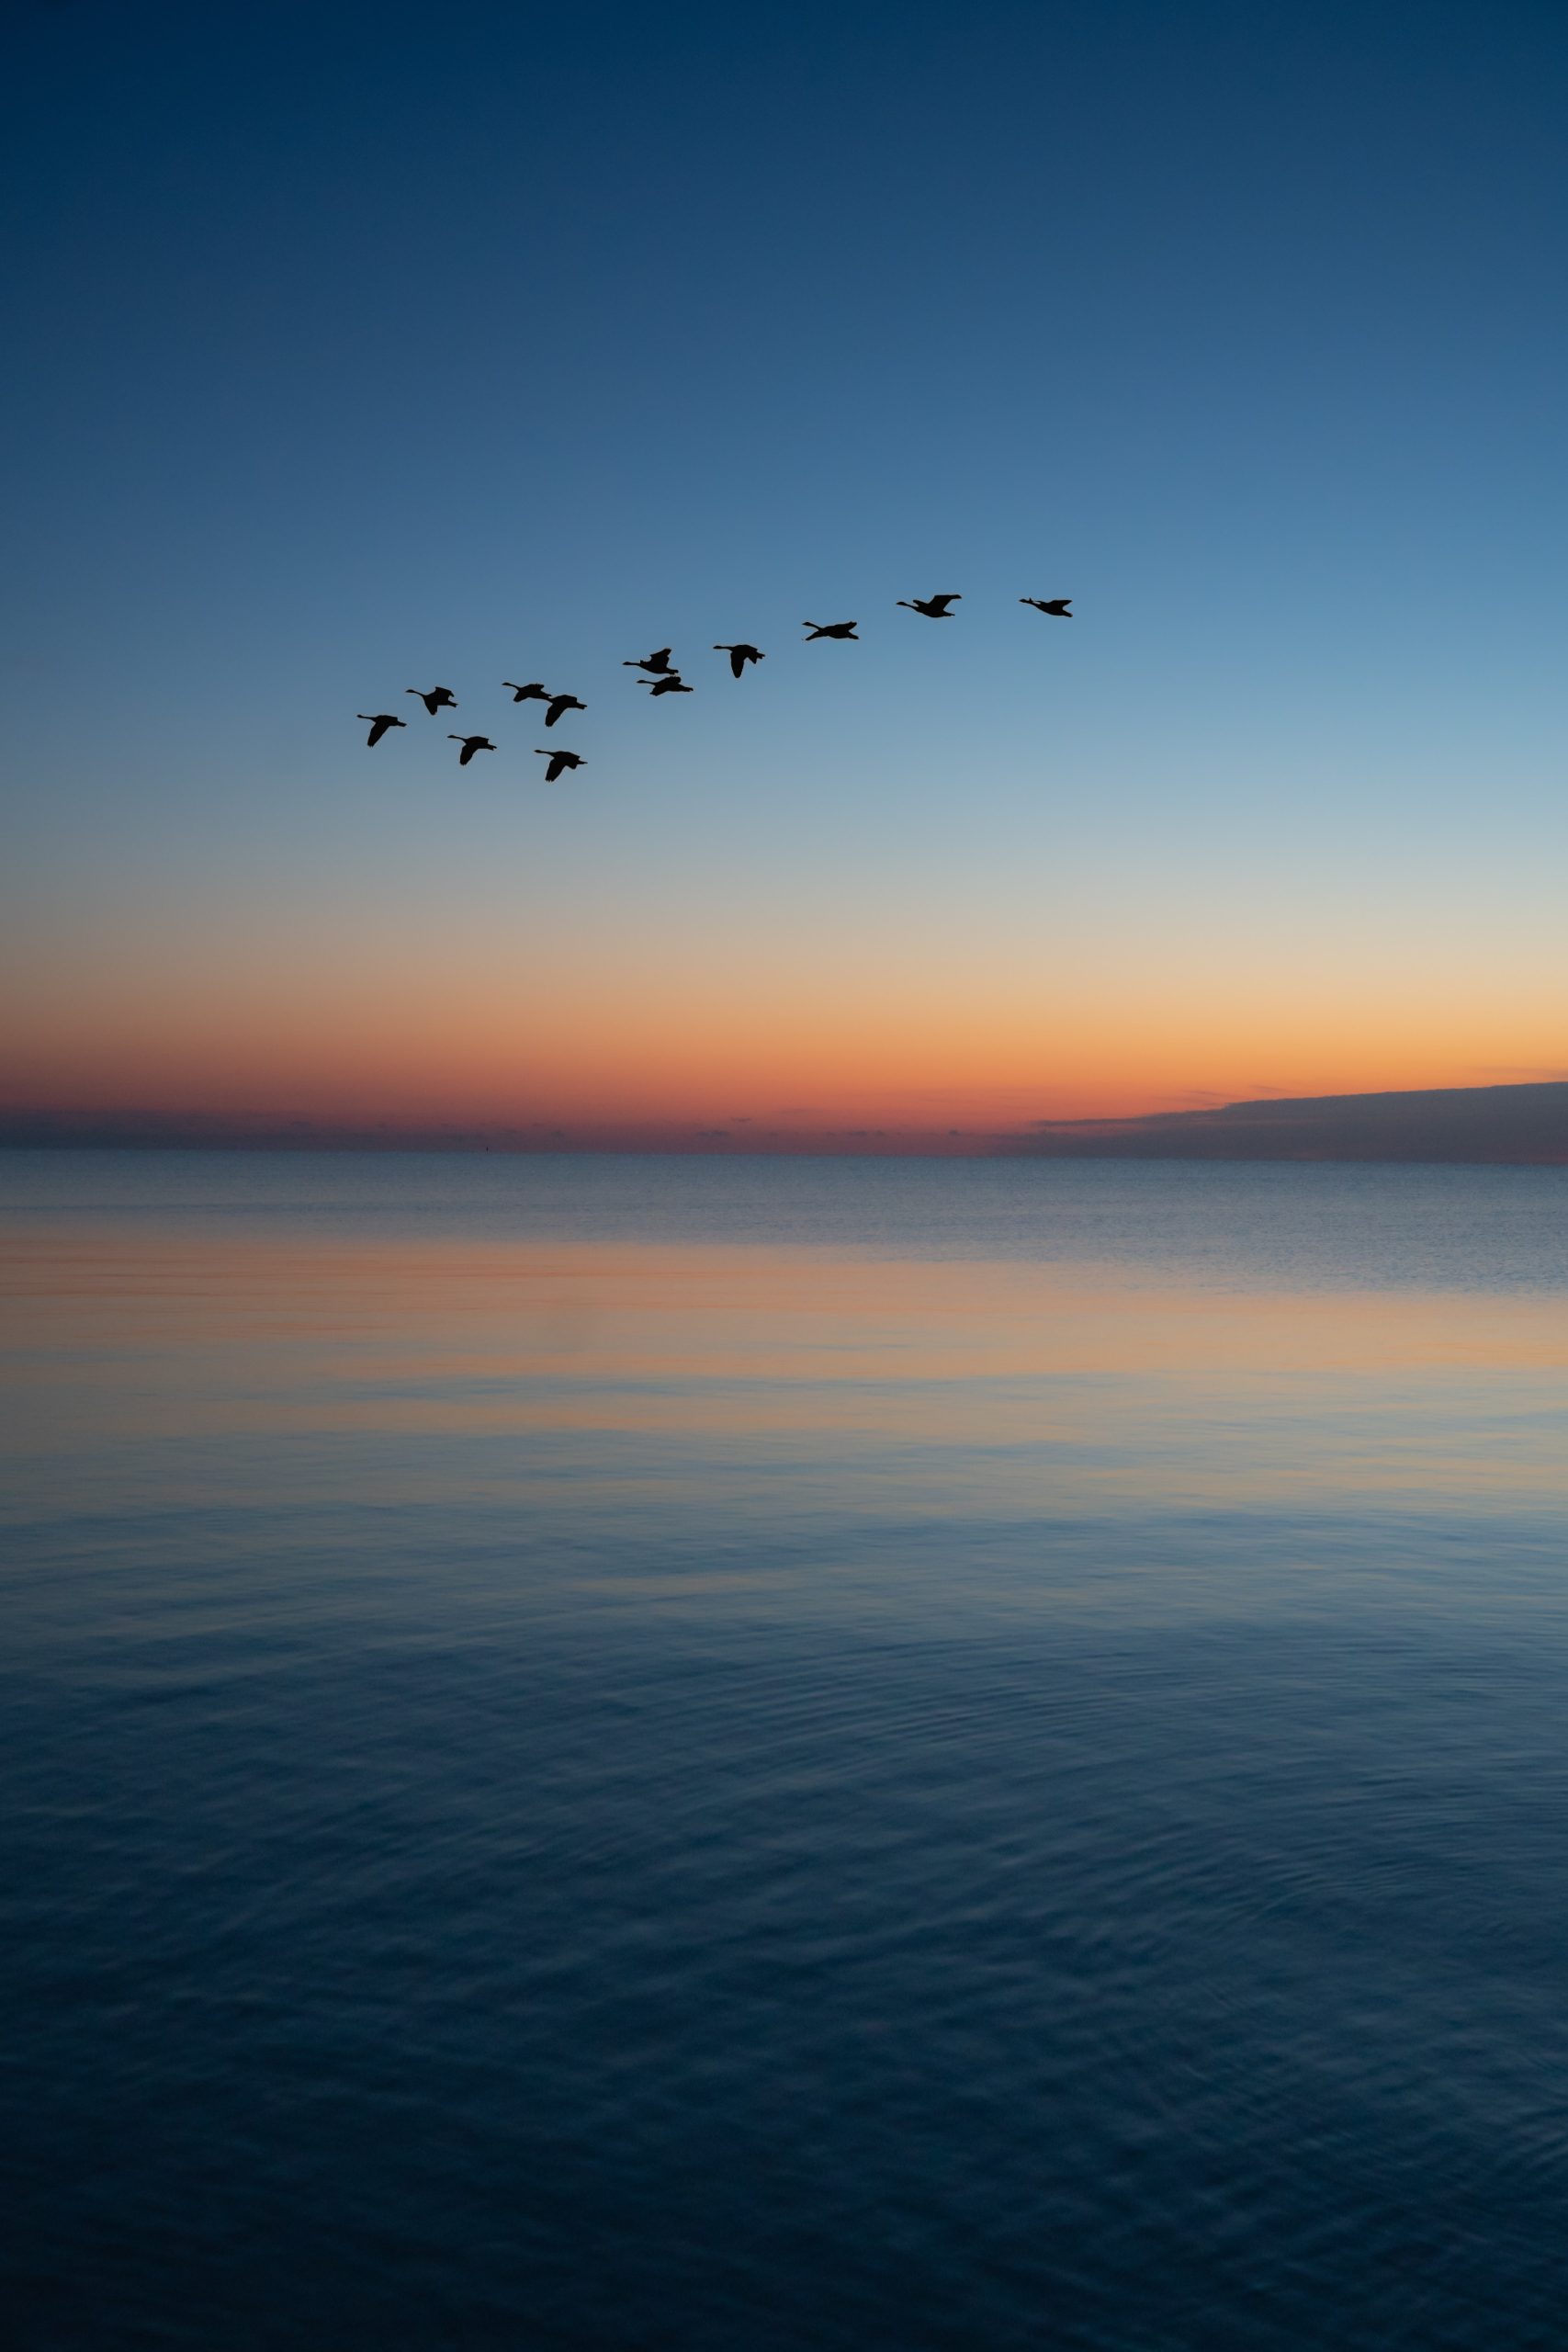 birds flying over the ocean and sunset or sunrise in the distance